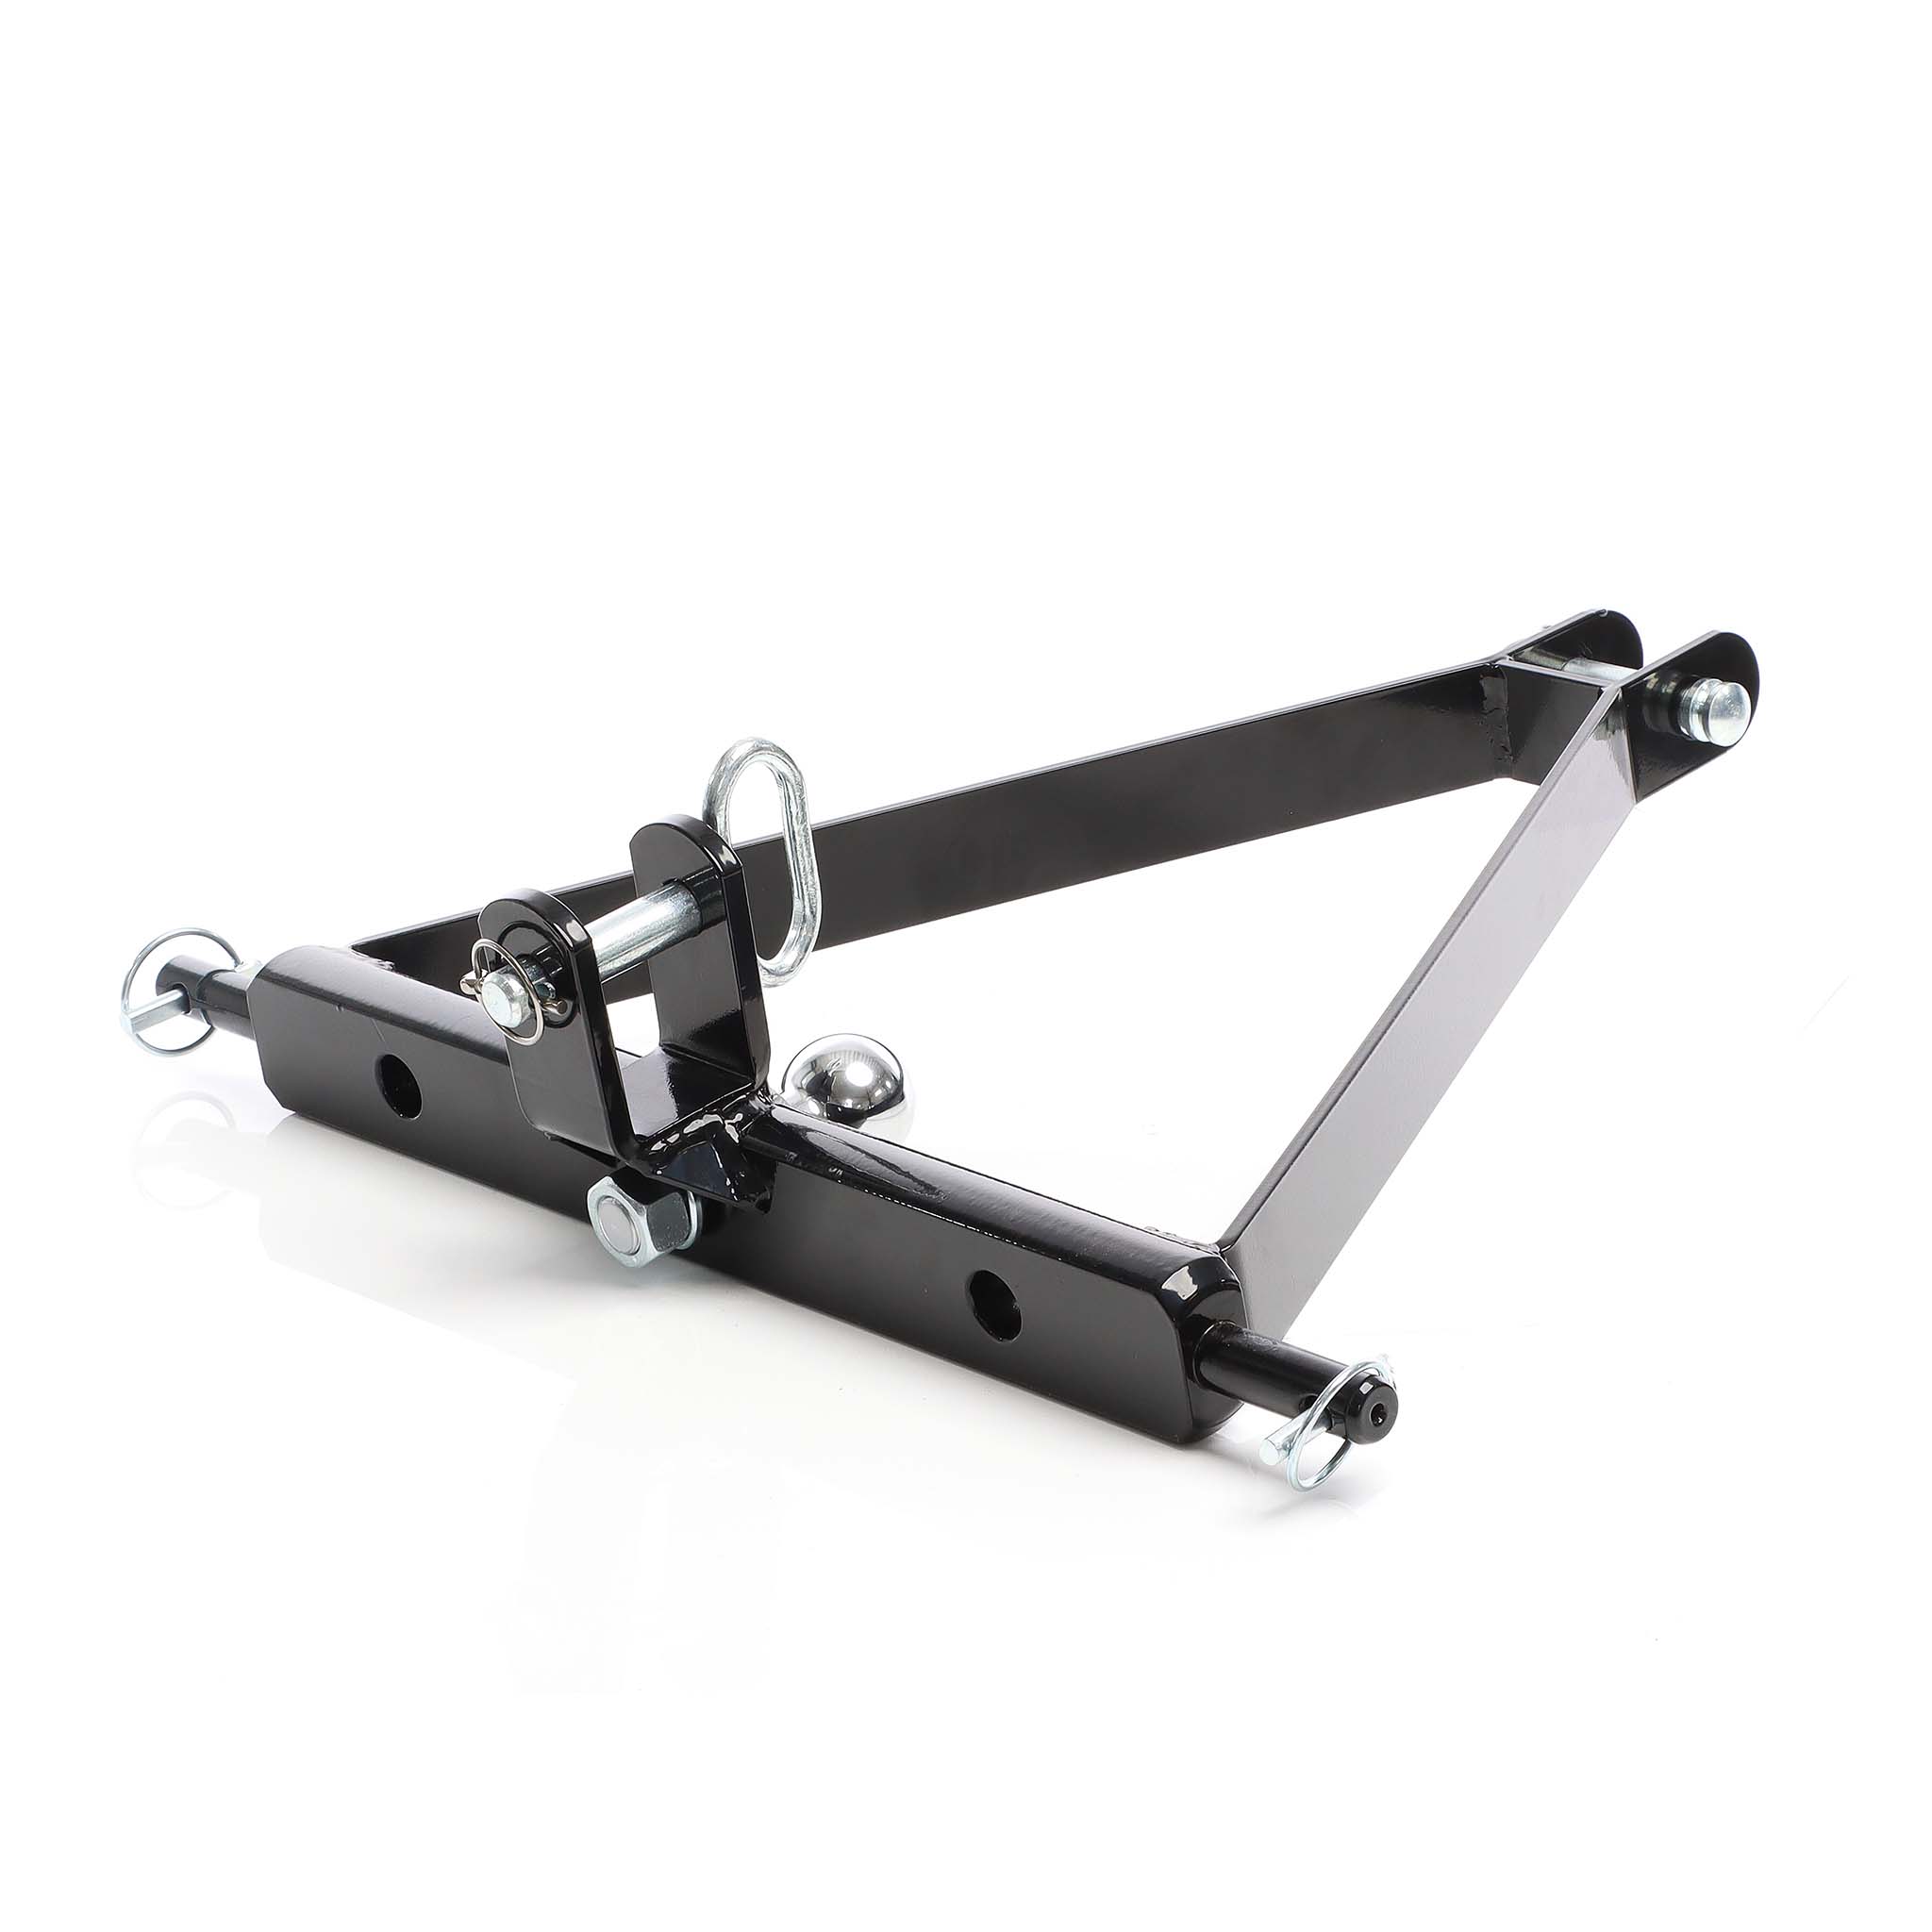 Wiltec Triangle d'attelage 610 mm Barre Remorquage Agricole Rail  triangulaire Cat. 1 Anti-rotation